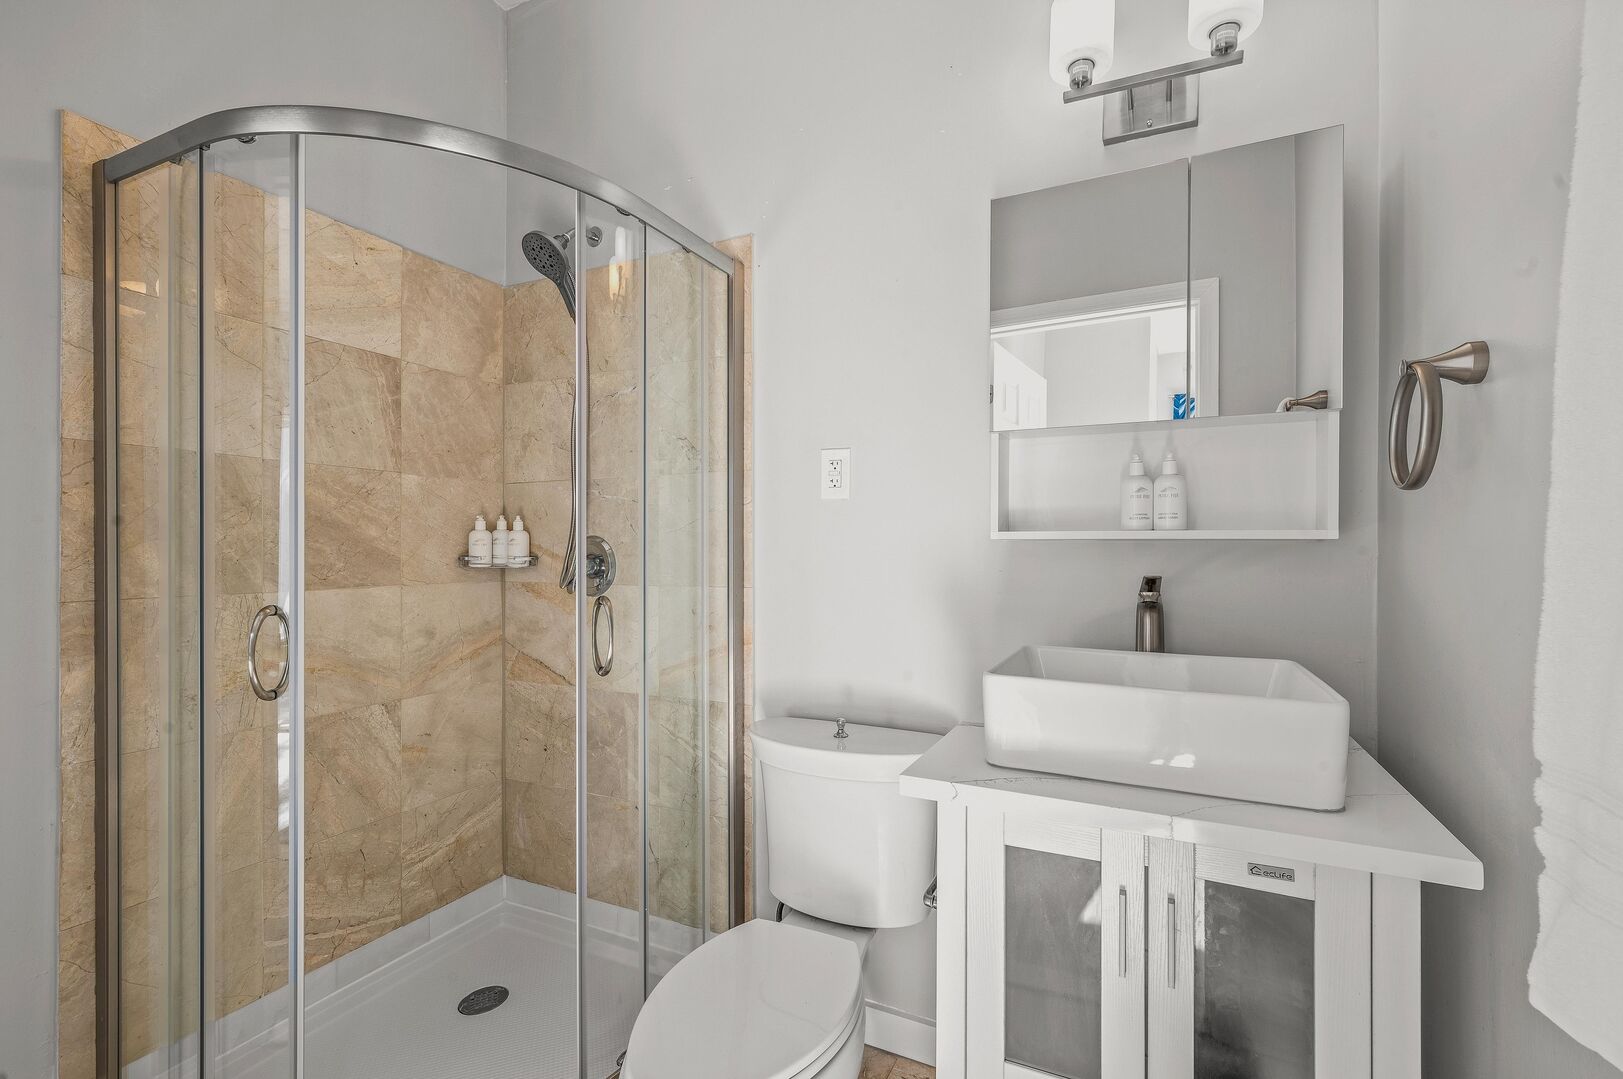 The third bathroom has a full shower and spa like amenities.